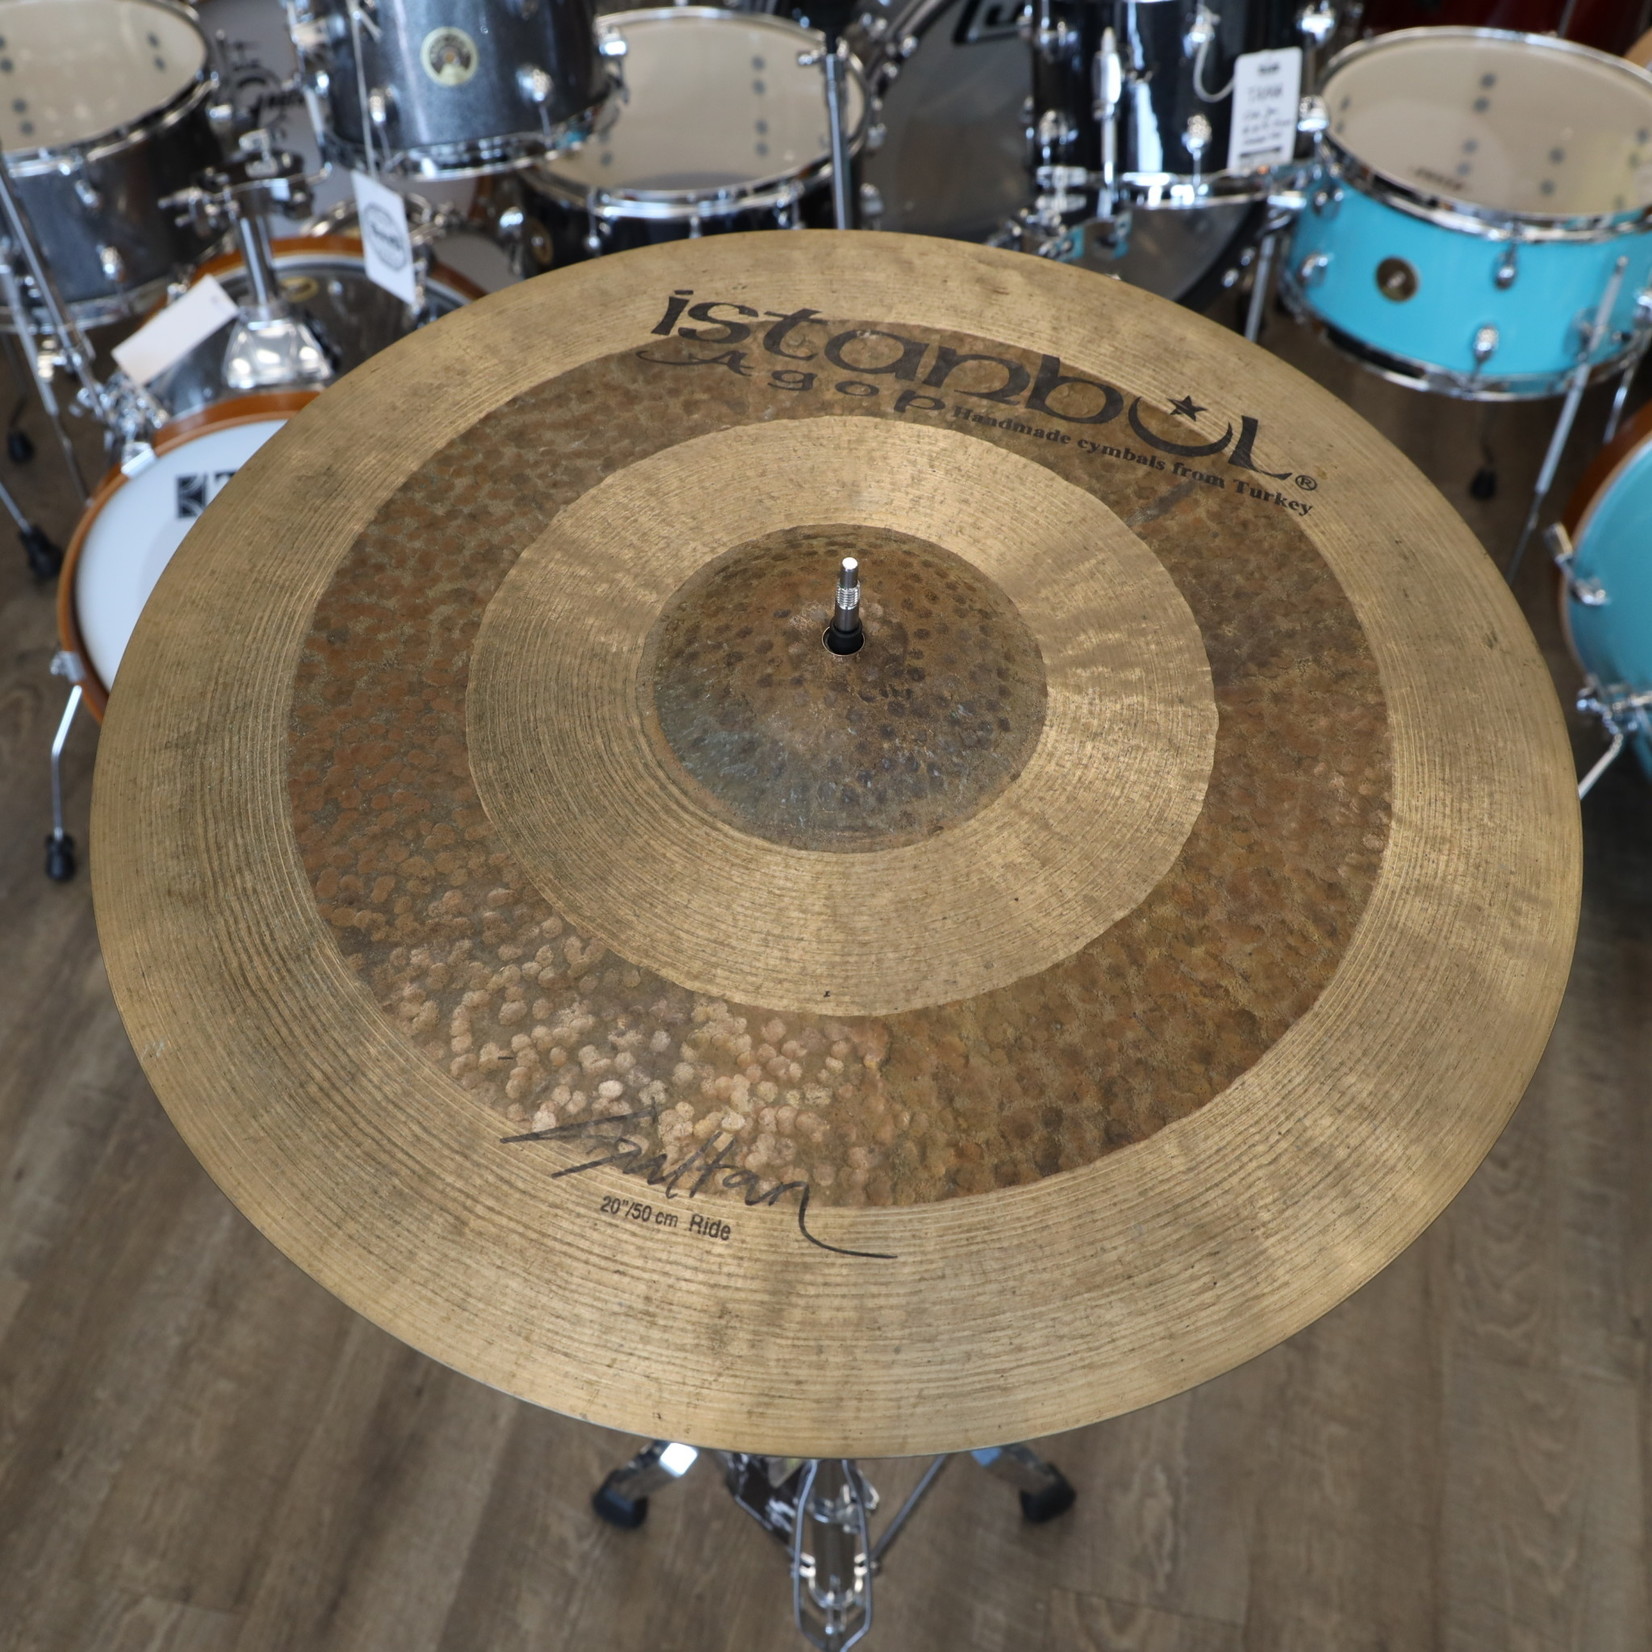 Istanbul Agop Used Istanbul Agop Sultan 20" Ride Cymbal 2460g